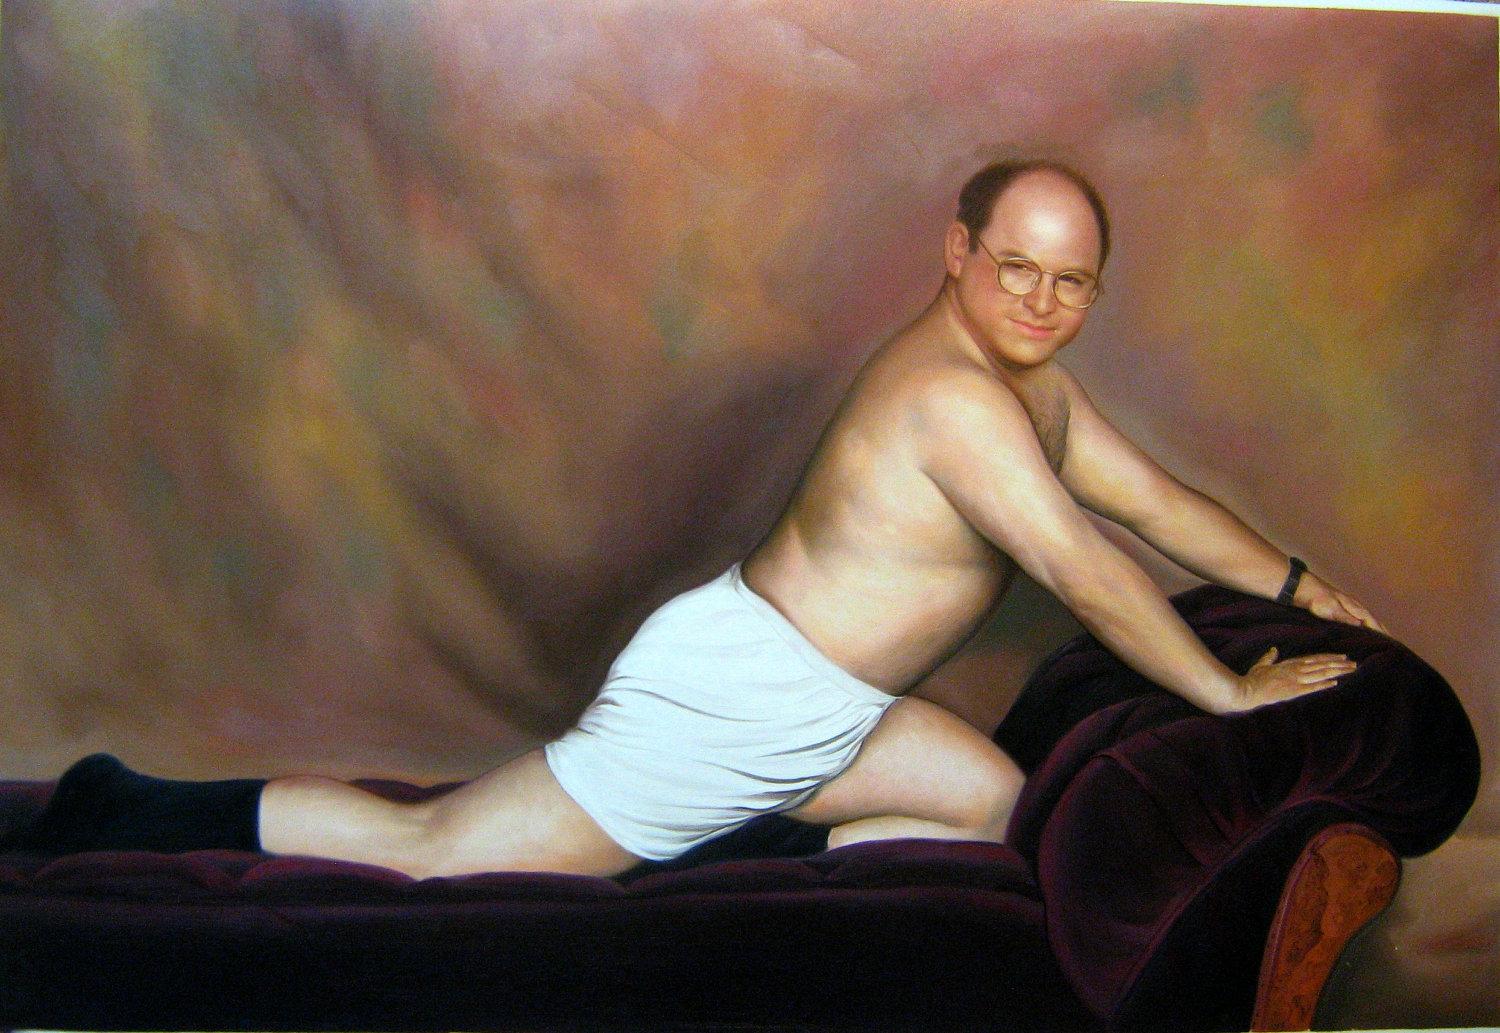 HD wallpaper, Seinfeld, Humor, Shirtless, Men, Actor, George Costanza, Artwork, Hair On Chest, Couch, Sensual Gaze